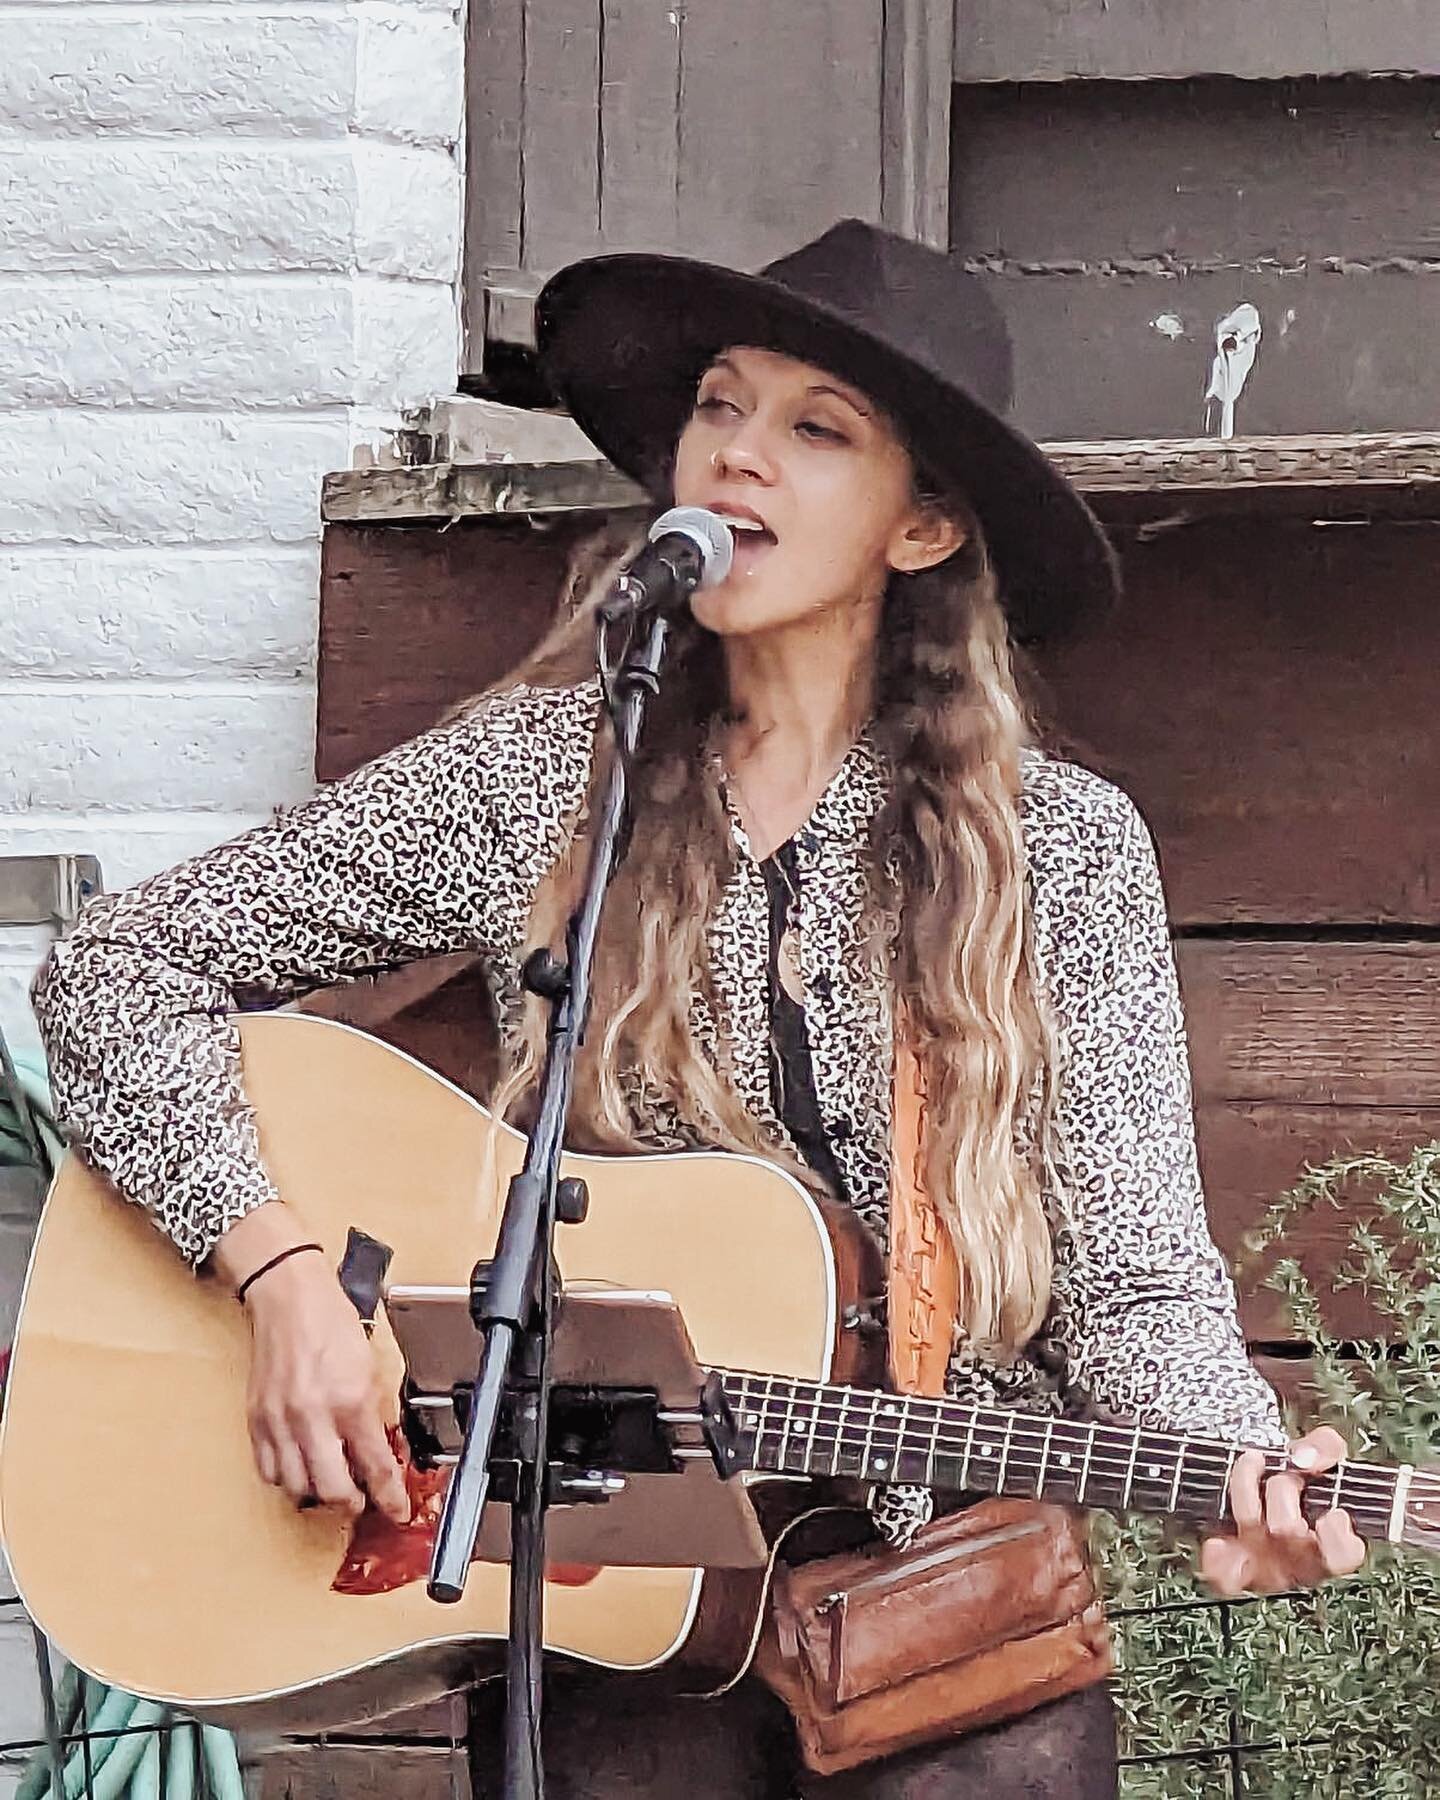 Thanks to everyone who came out to @waystationmarin last night! I&rsquo;m back in Sonoma County this evening at @dawnranch in Guerneville, 5:30-7:30 pm! 🌲

#clementinedarlingmusic #altcountry #acoustic #folkmusic #americana #womeninmusic  #singerson